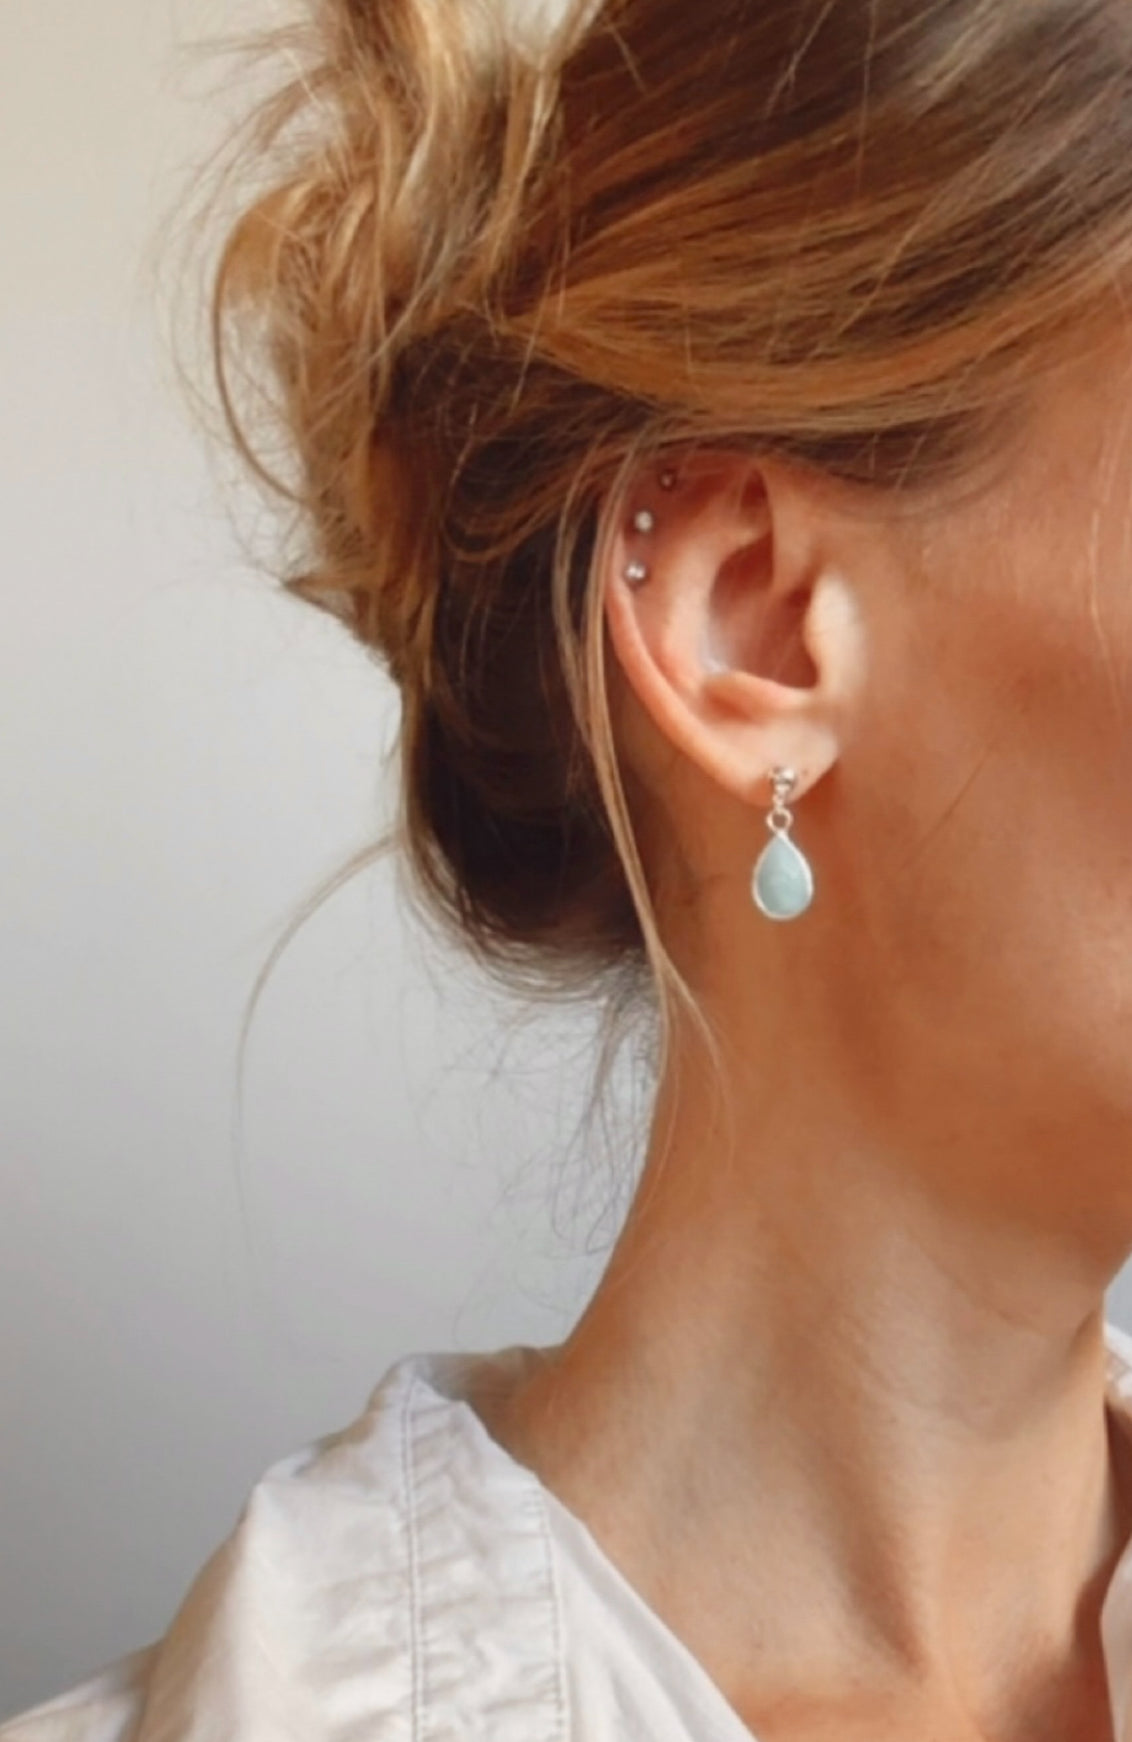 The Baya Earrings, crafted from exquisite sterling silver, showcase the timeless beauty of tear-drop-shaped Aquamarine gemstones. Aquamarine, with its serene blue hues reminiscent of the ocean, is used&nbsp;to inspire calmness and clarity.